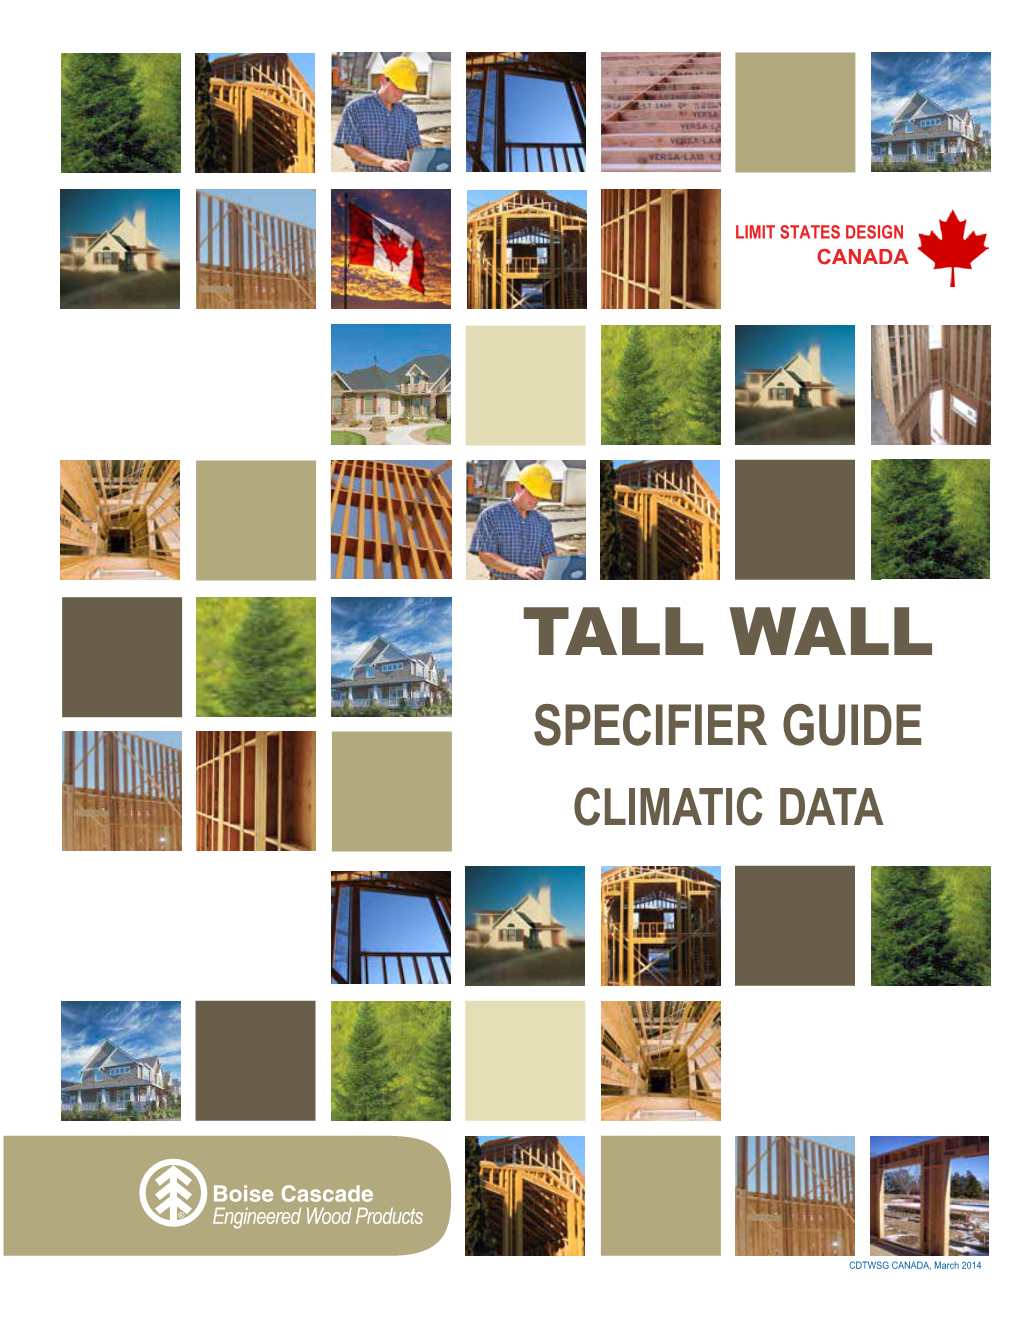 TALL WALL SPECIFIER Guide CLIMATIC DATA